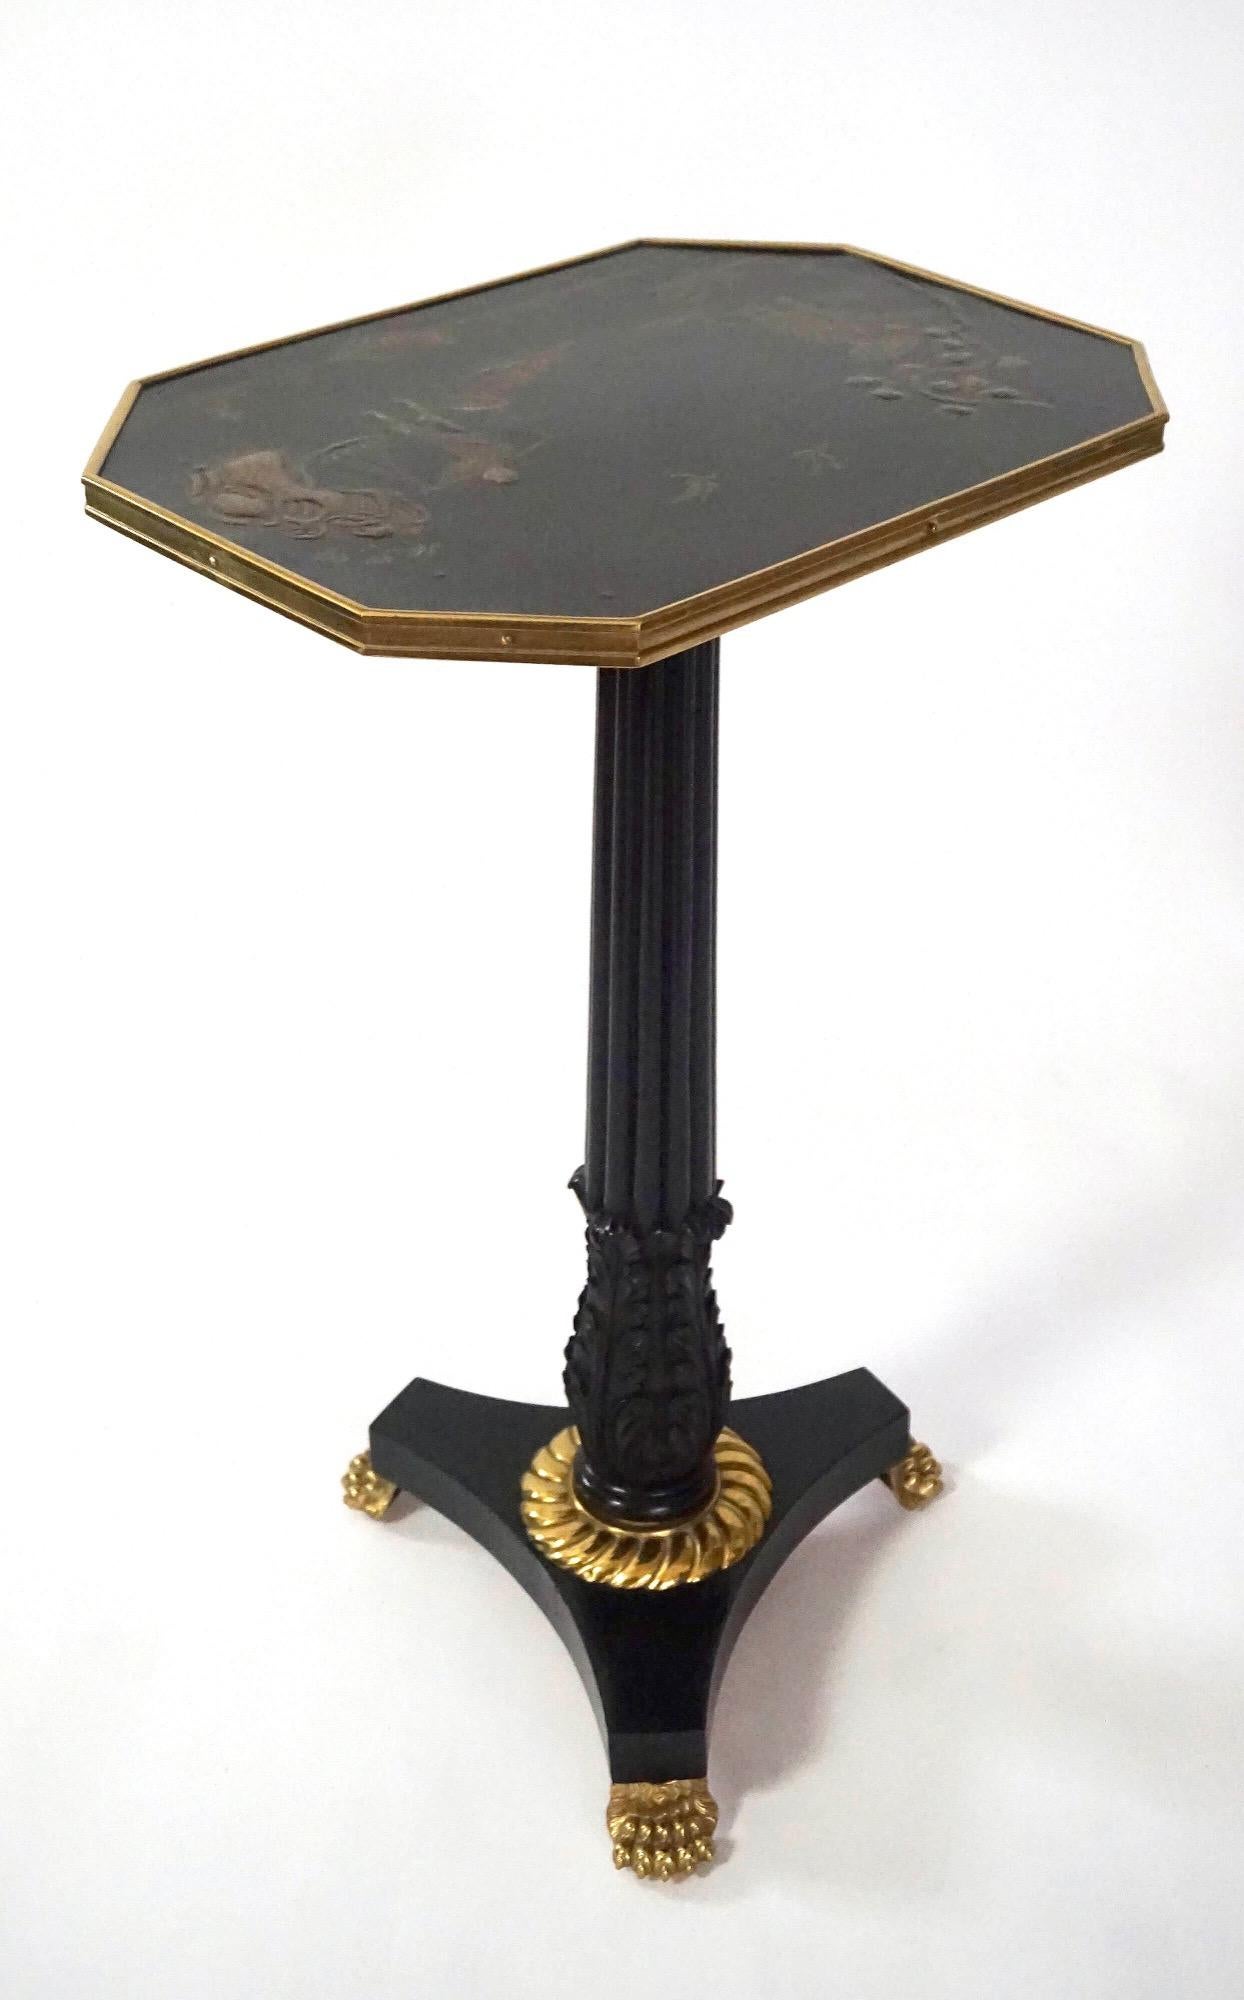 English Regency Chinoiserie Lacquer Top Ebonized Brass Mounted Stand, circa 1820 For Sale 5